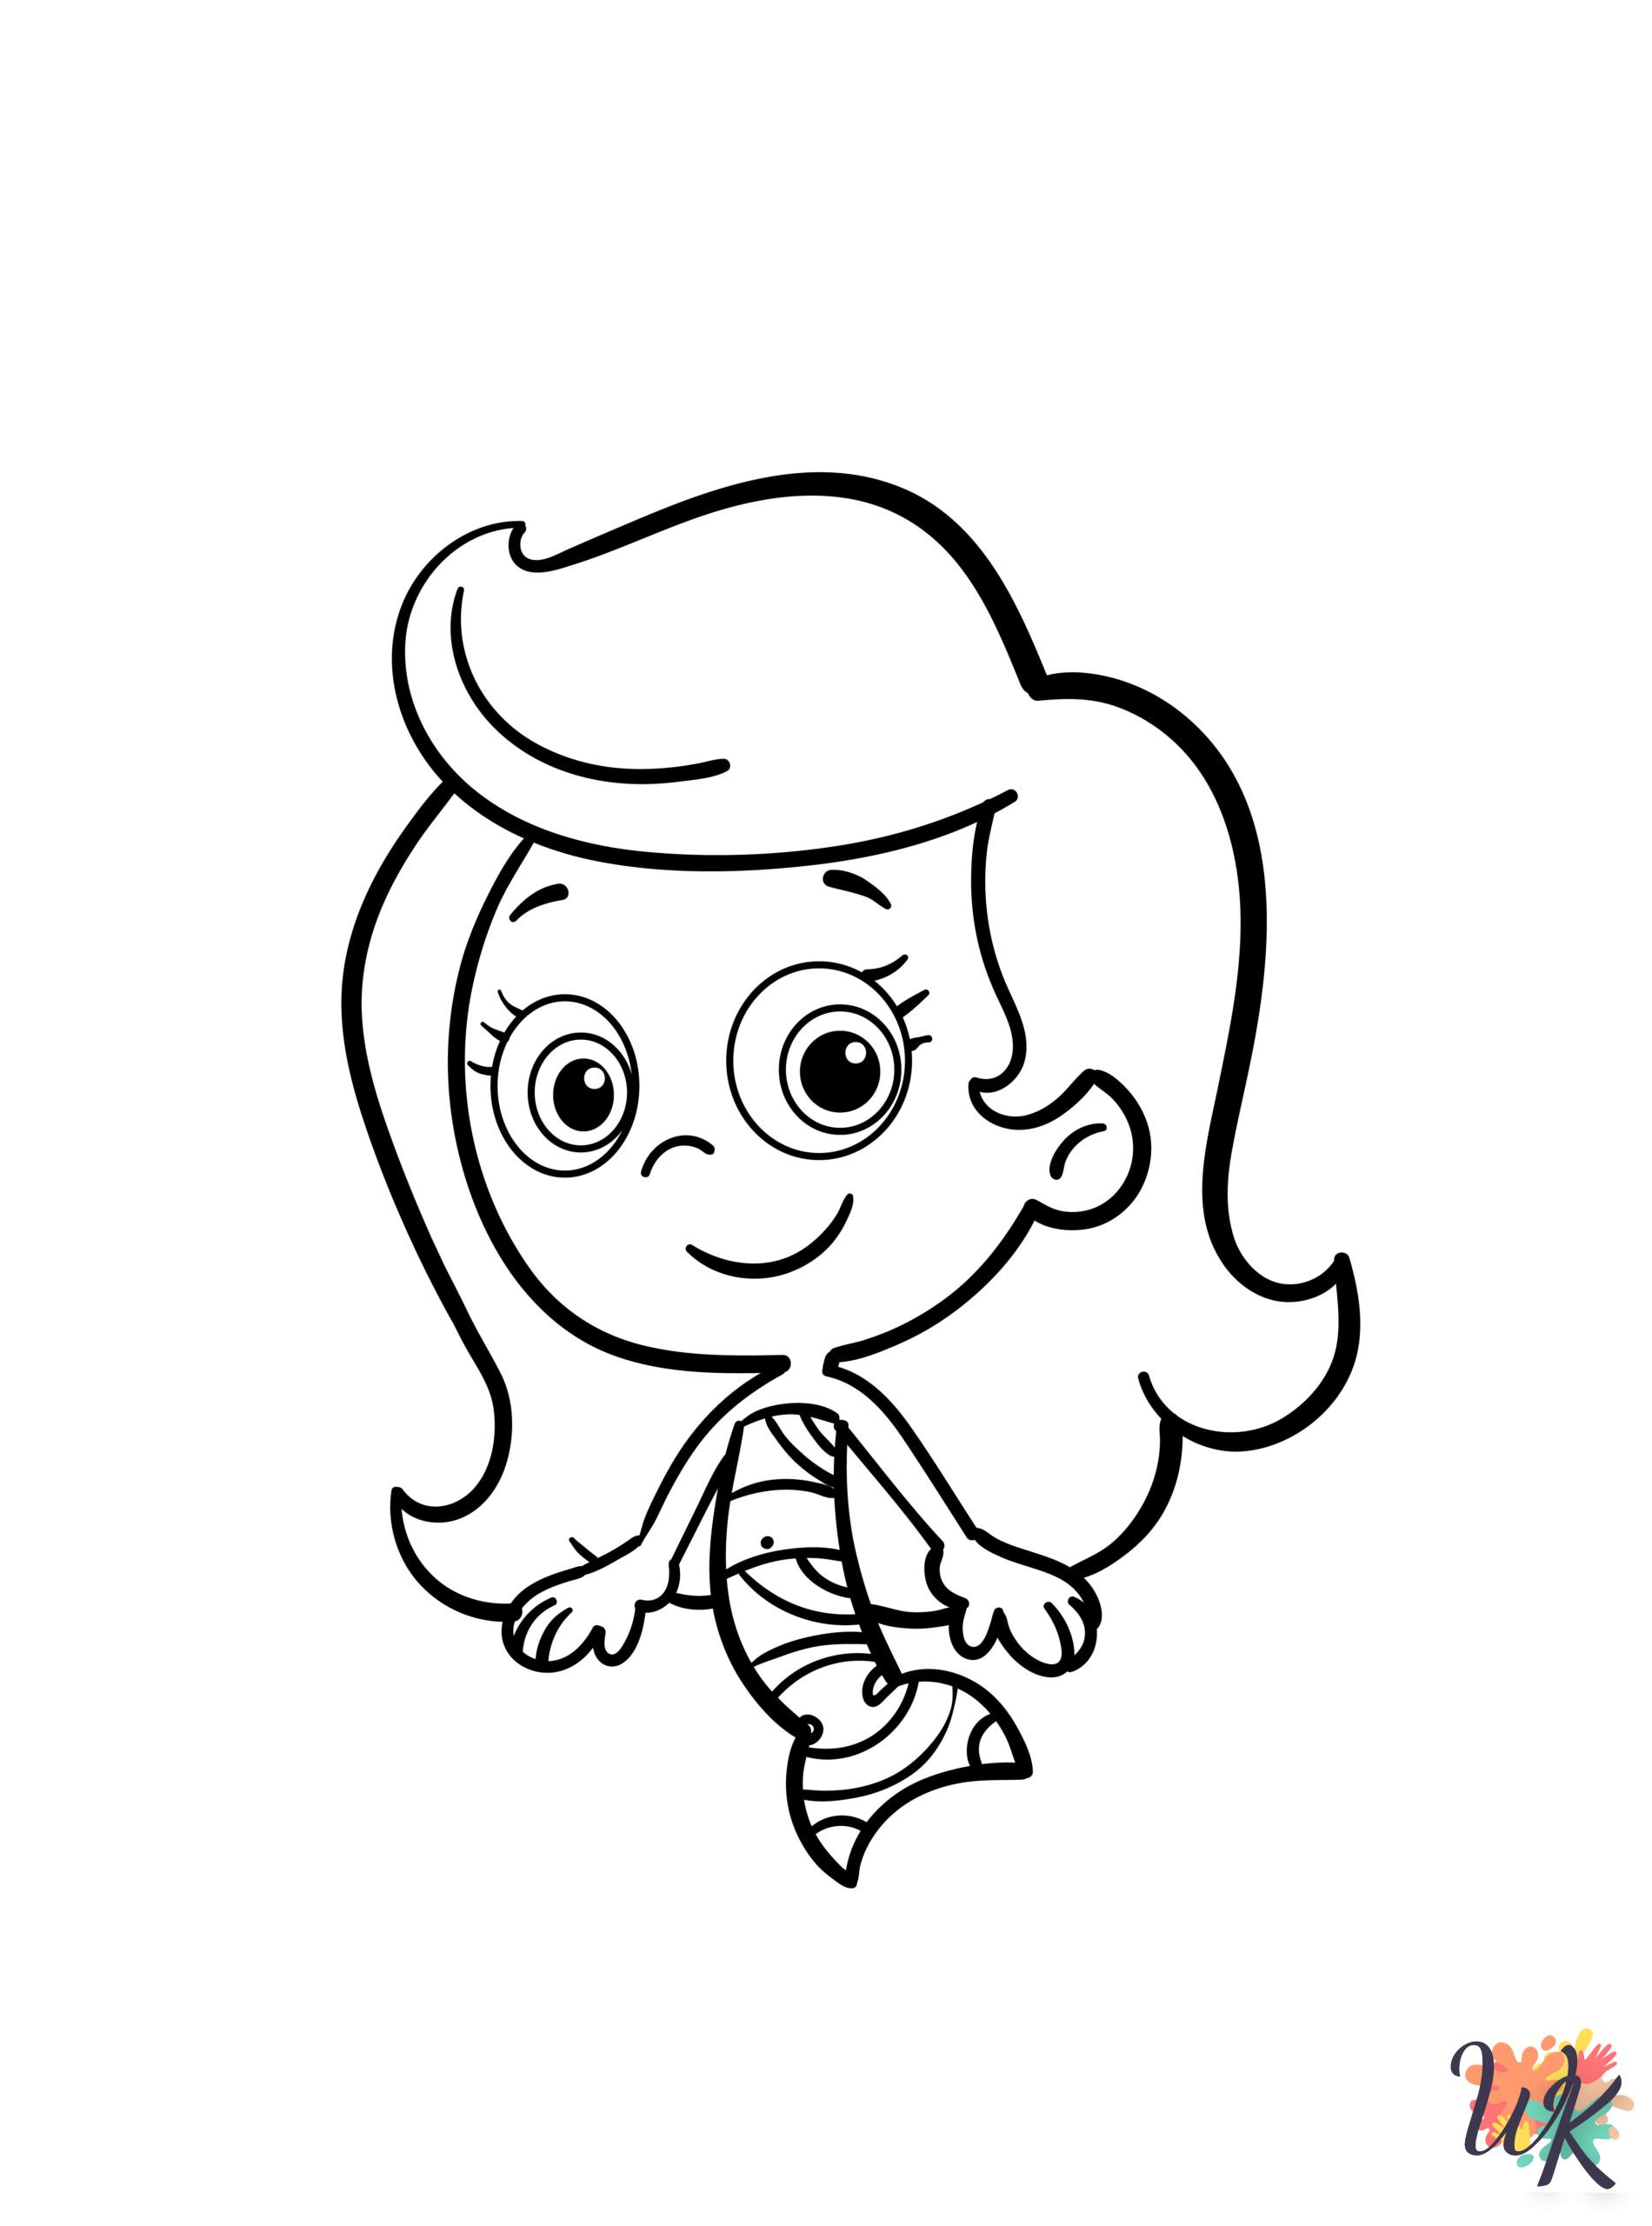 Bubble Guppies coloring book pages